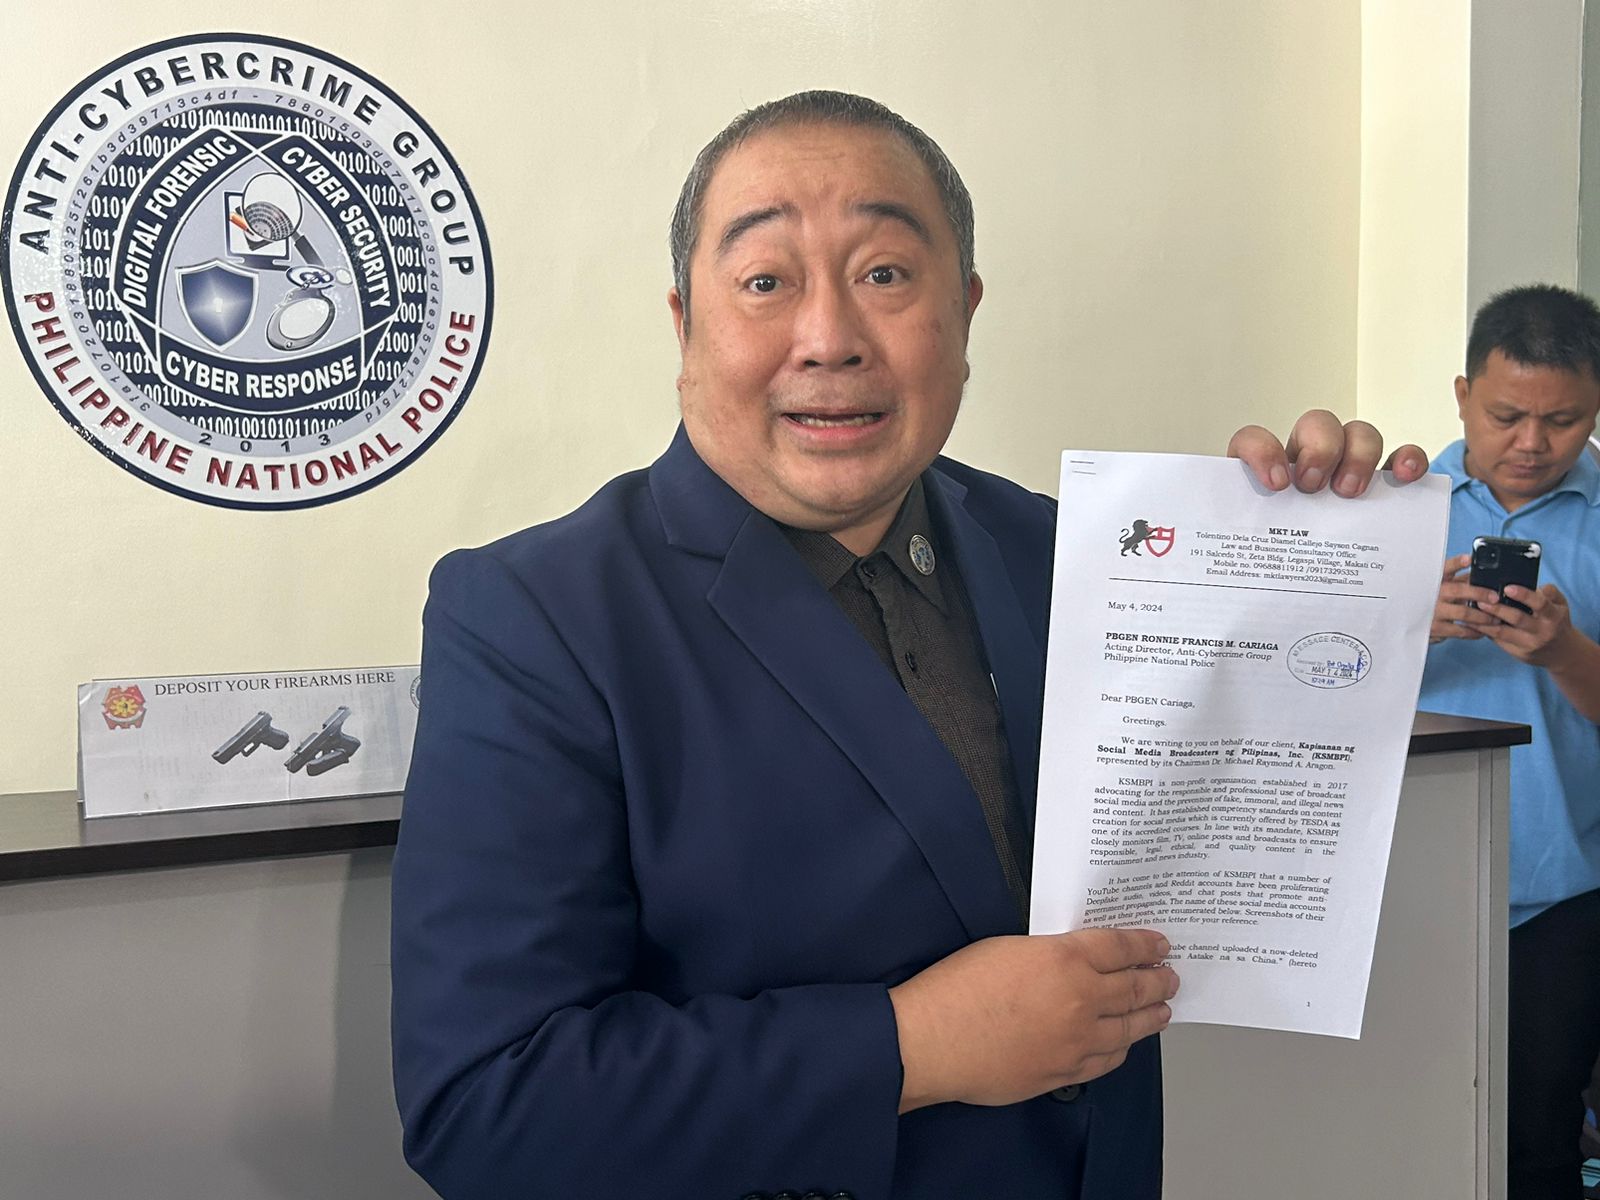 Kapisanan ng Social Media Broadcasters ng Pilipinas, Inc. (KSMBPI) filed criminal complaints on Tuesday against certain social media individuals for uploading or publishing "illegal, immoral and libelous content" on their accounts, including the viral deepfake video of President Ferdinand Marcos Jr. 